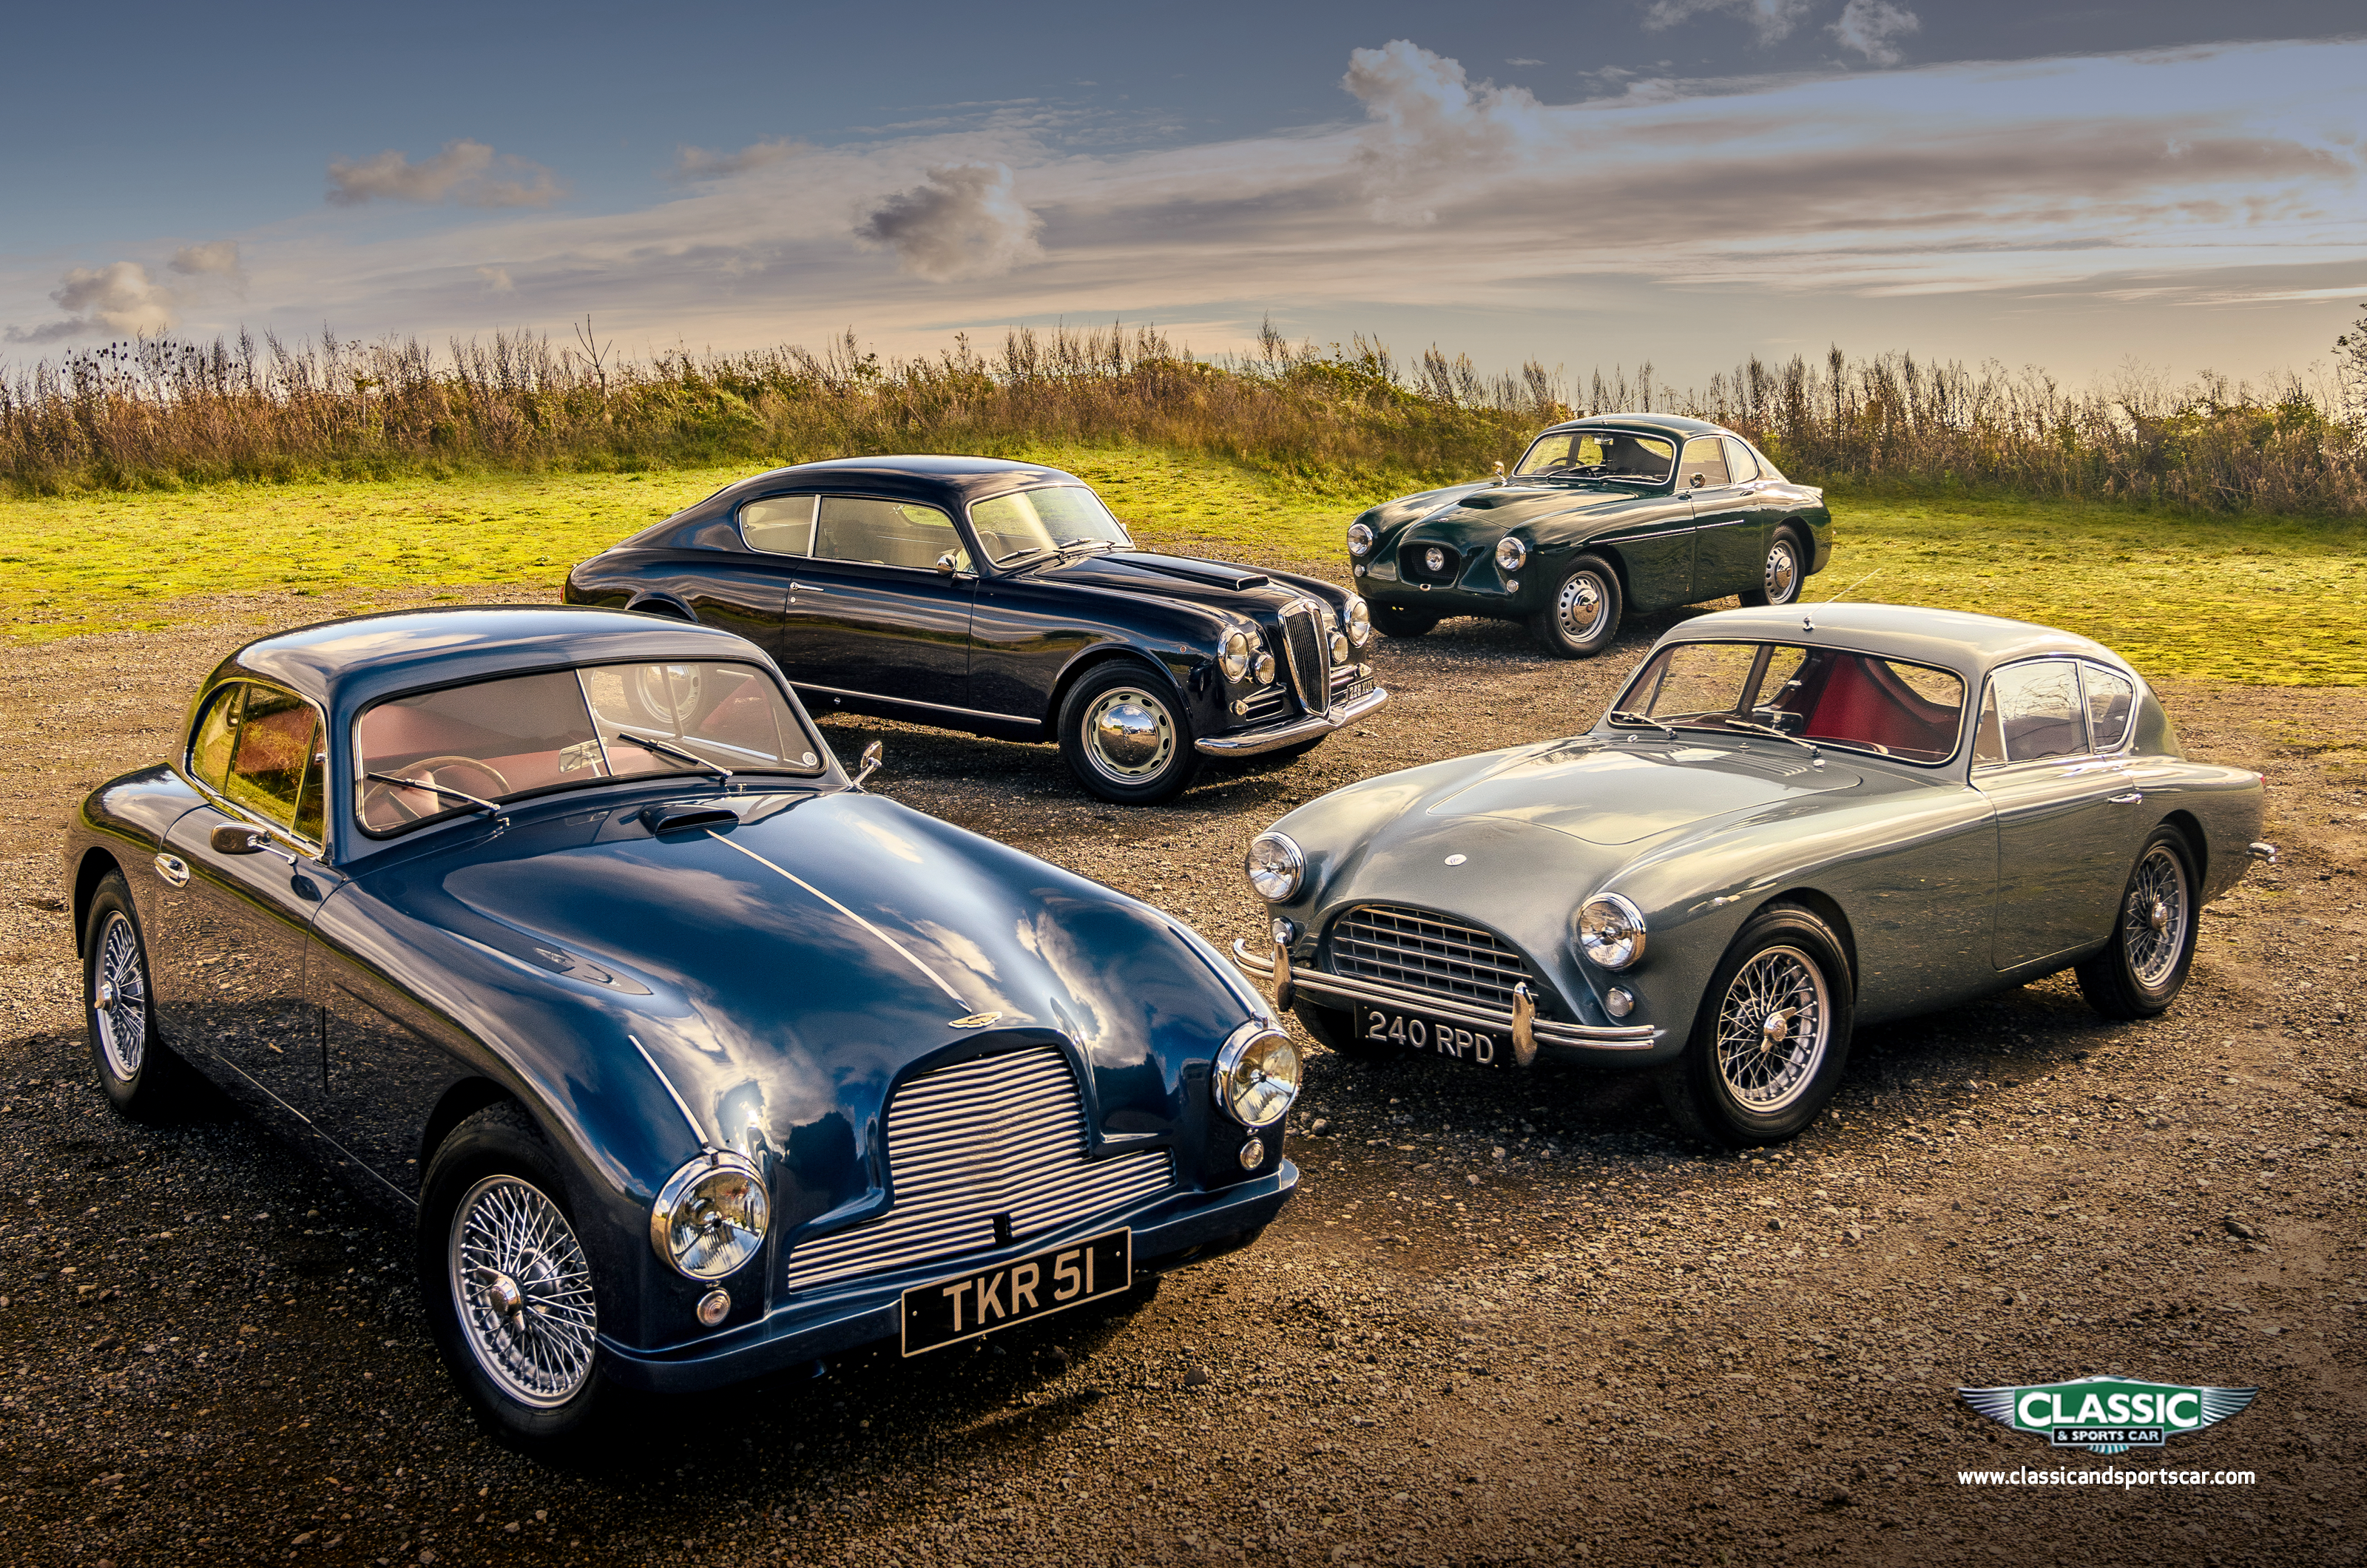 Four fantastic wallpaper from our March 2021 issue. Classic & Sports Car